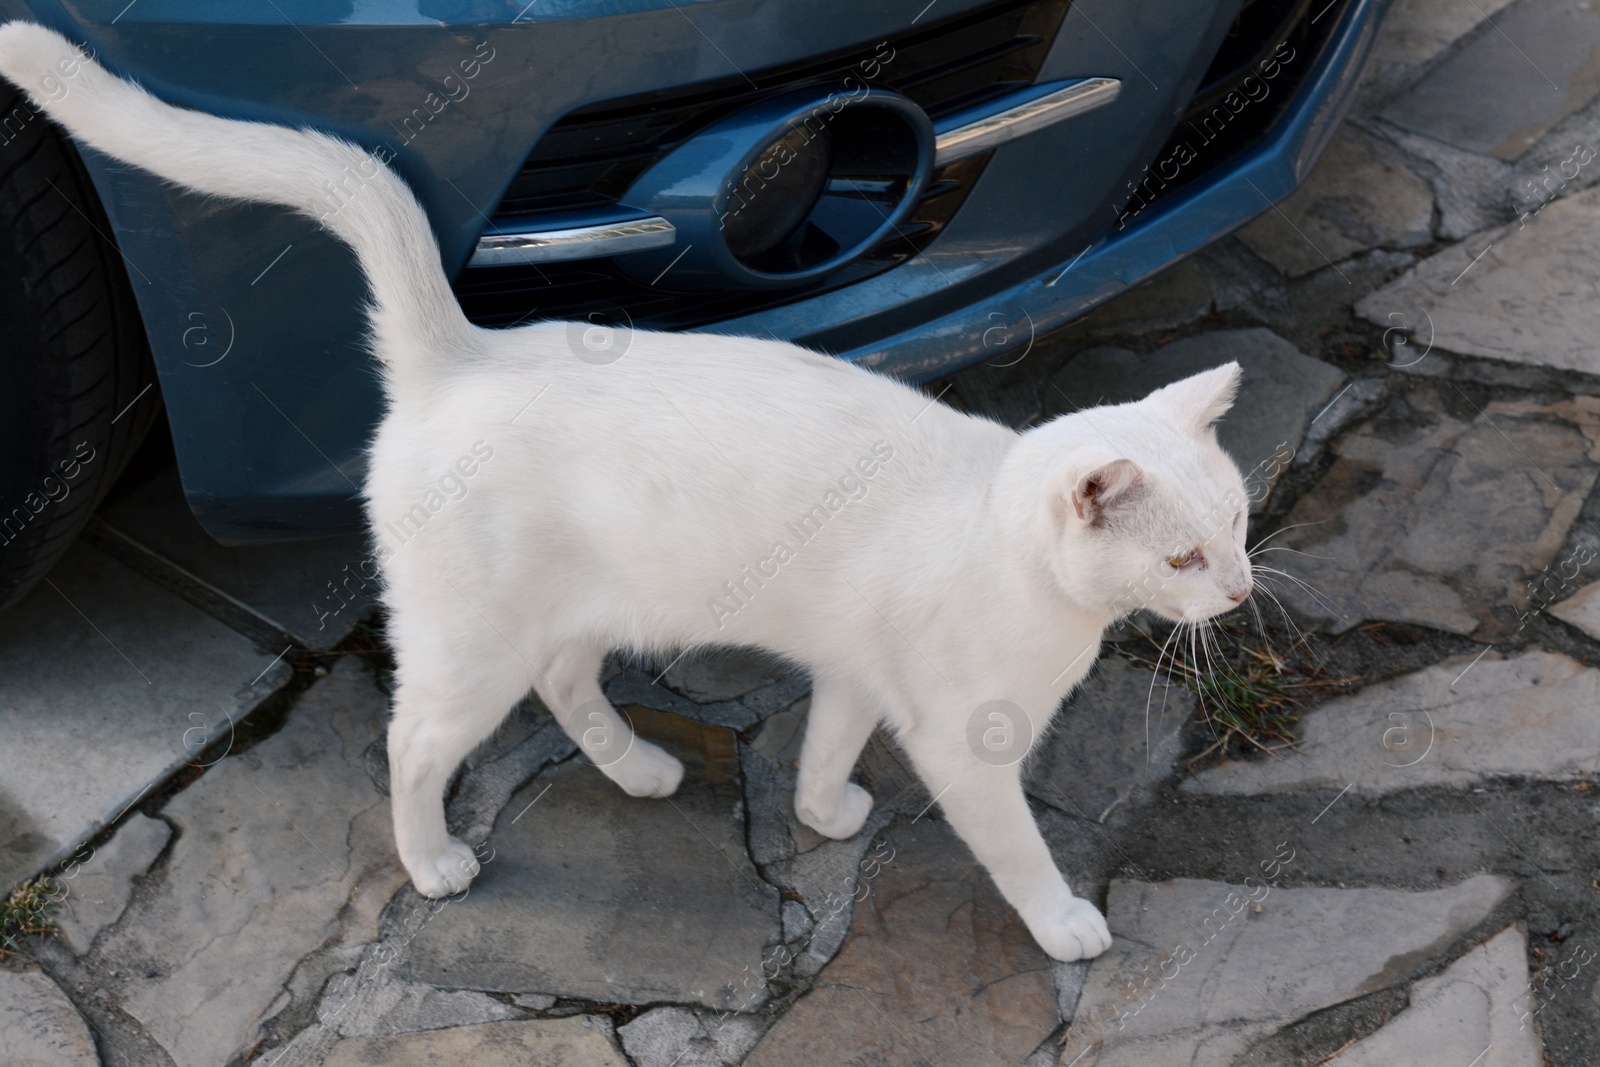 Photo of Lonely stray cat on stone surface near car outdoors. Homeless pet